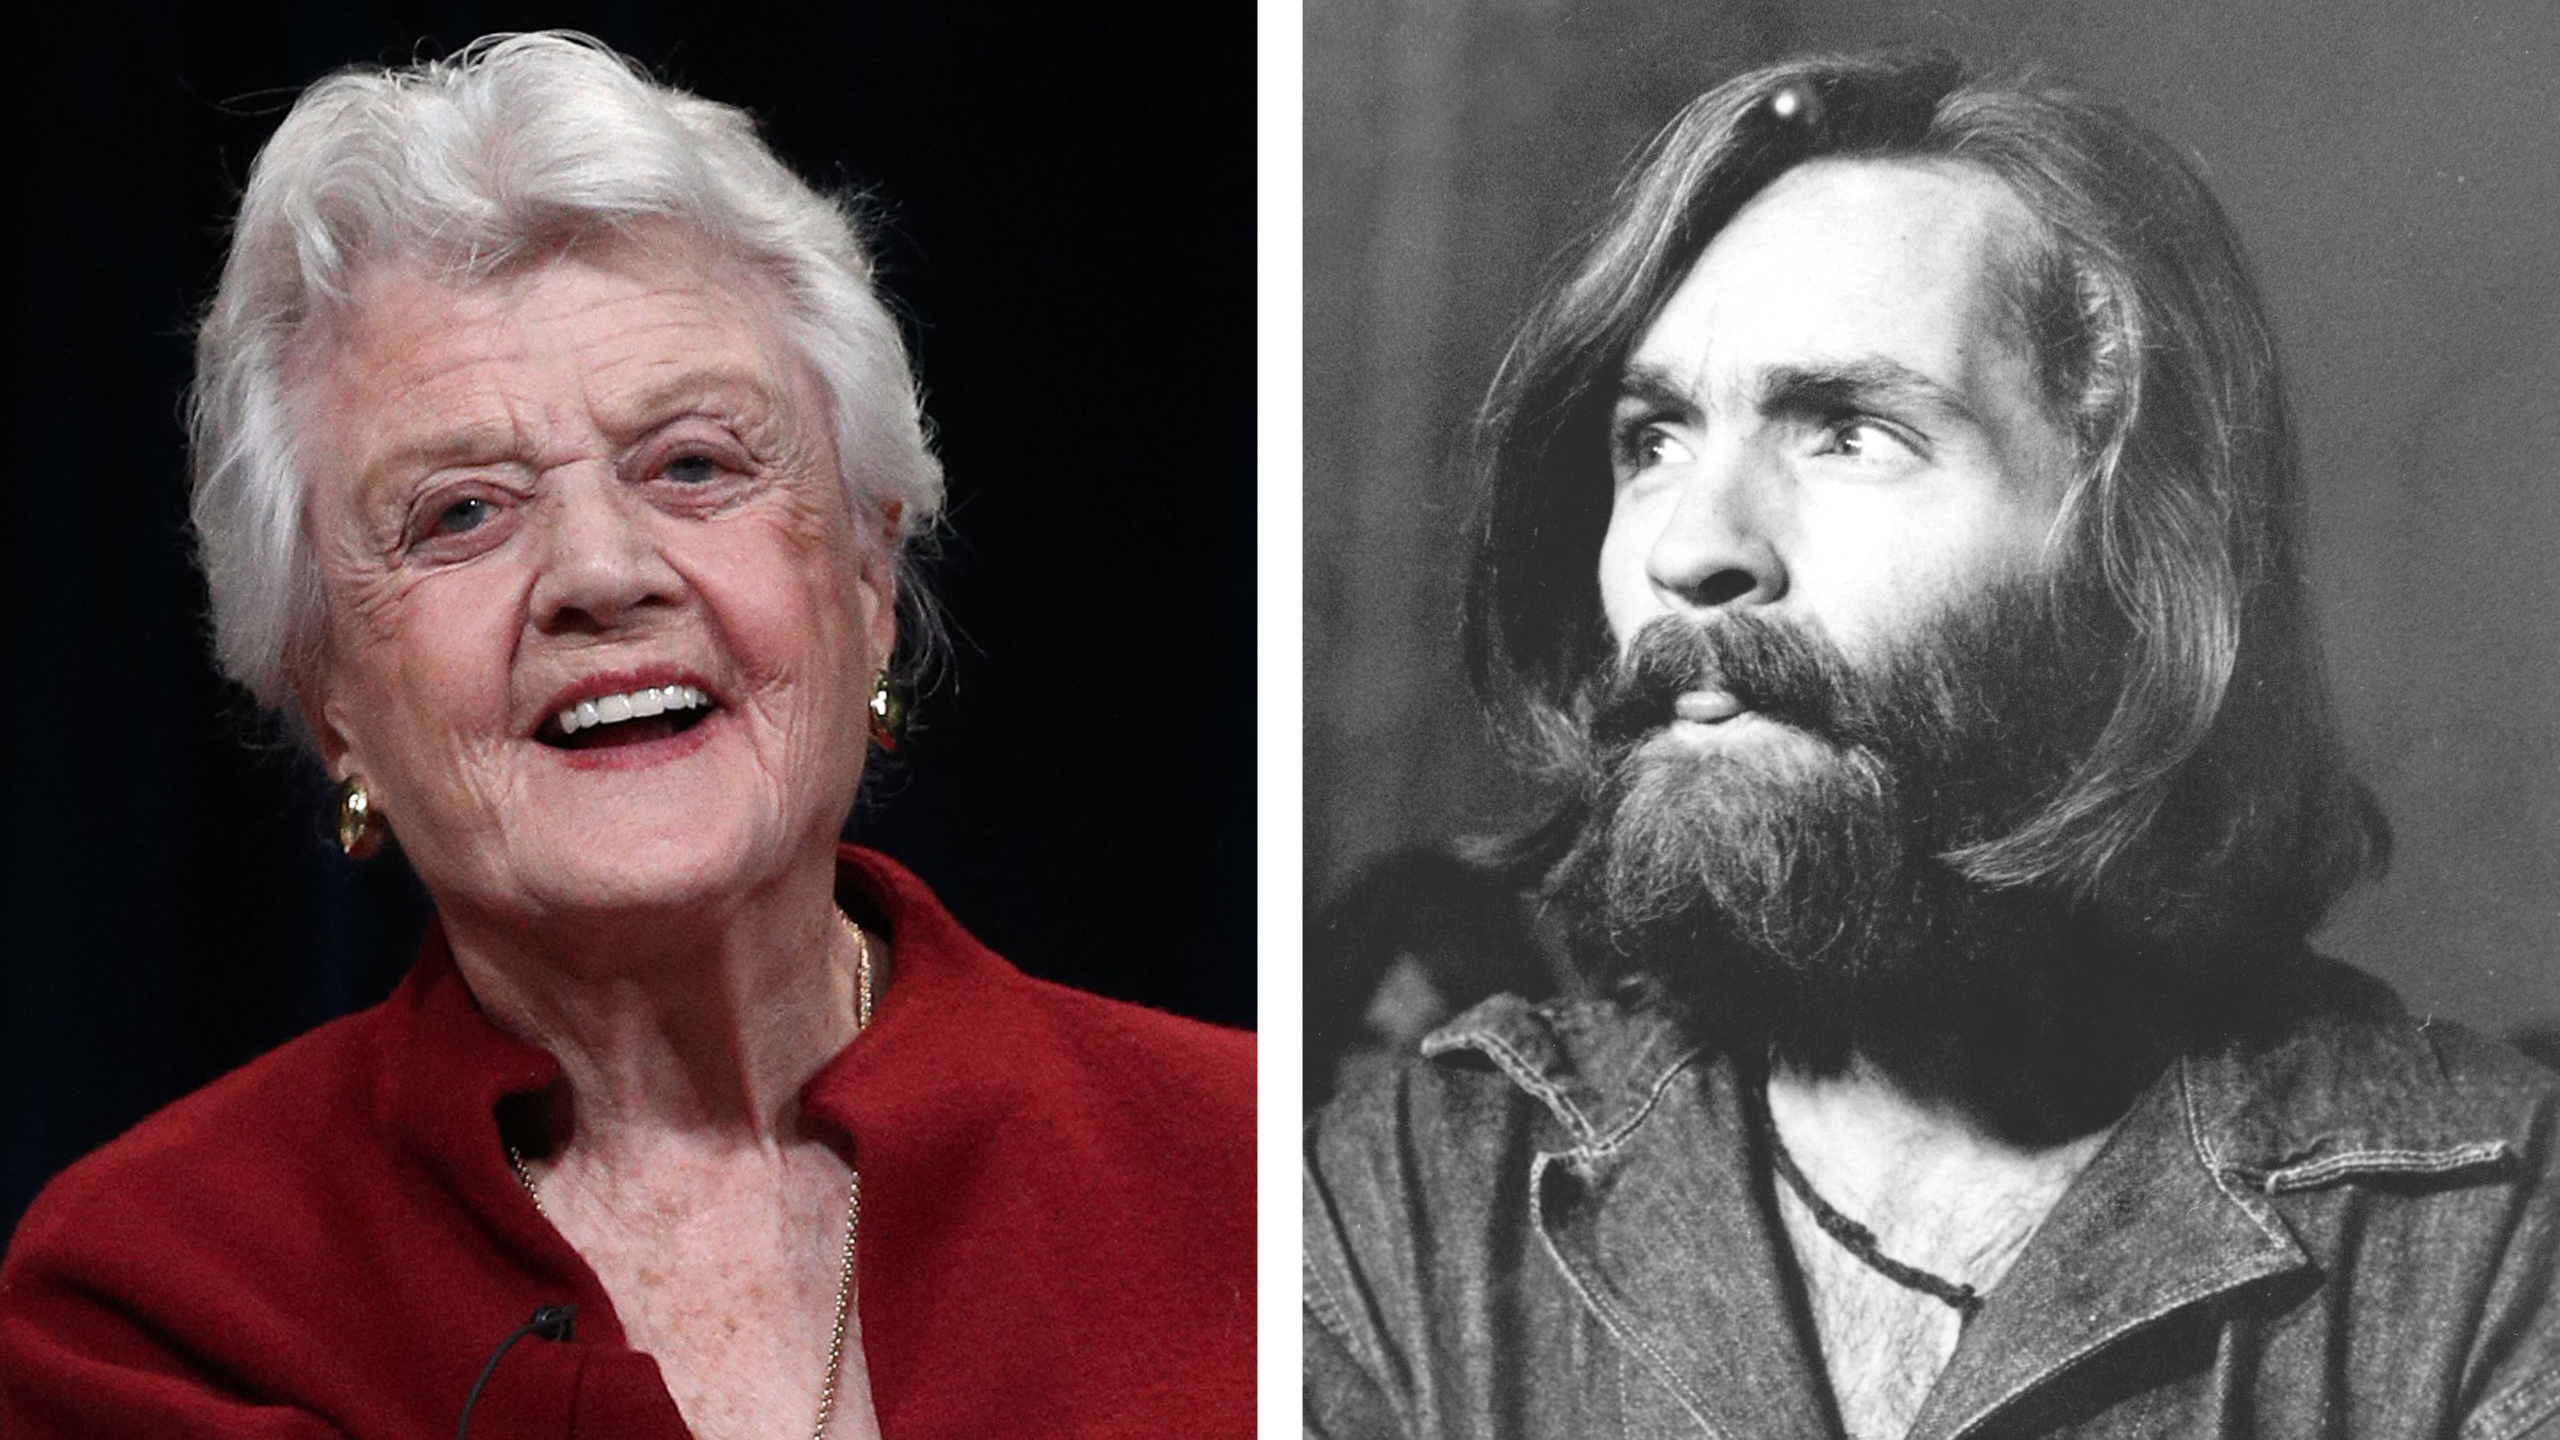 Story of Angela Lansbury Saving Daughter From Charles Manson in the 60’s Goes Big on Social Media After Her Death